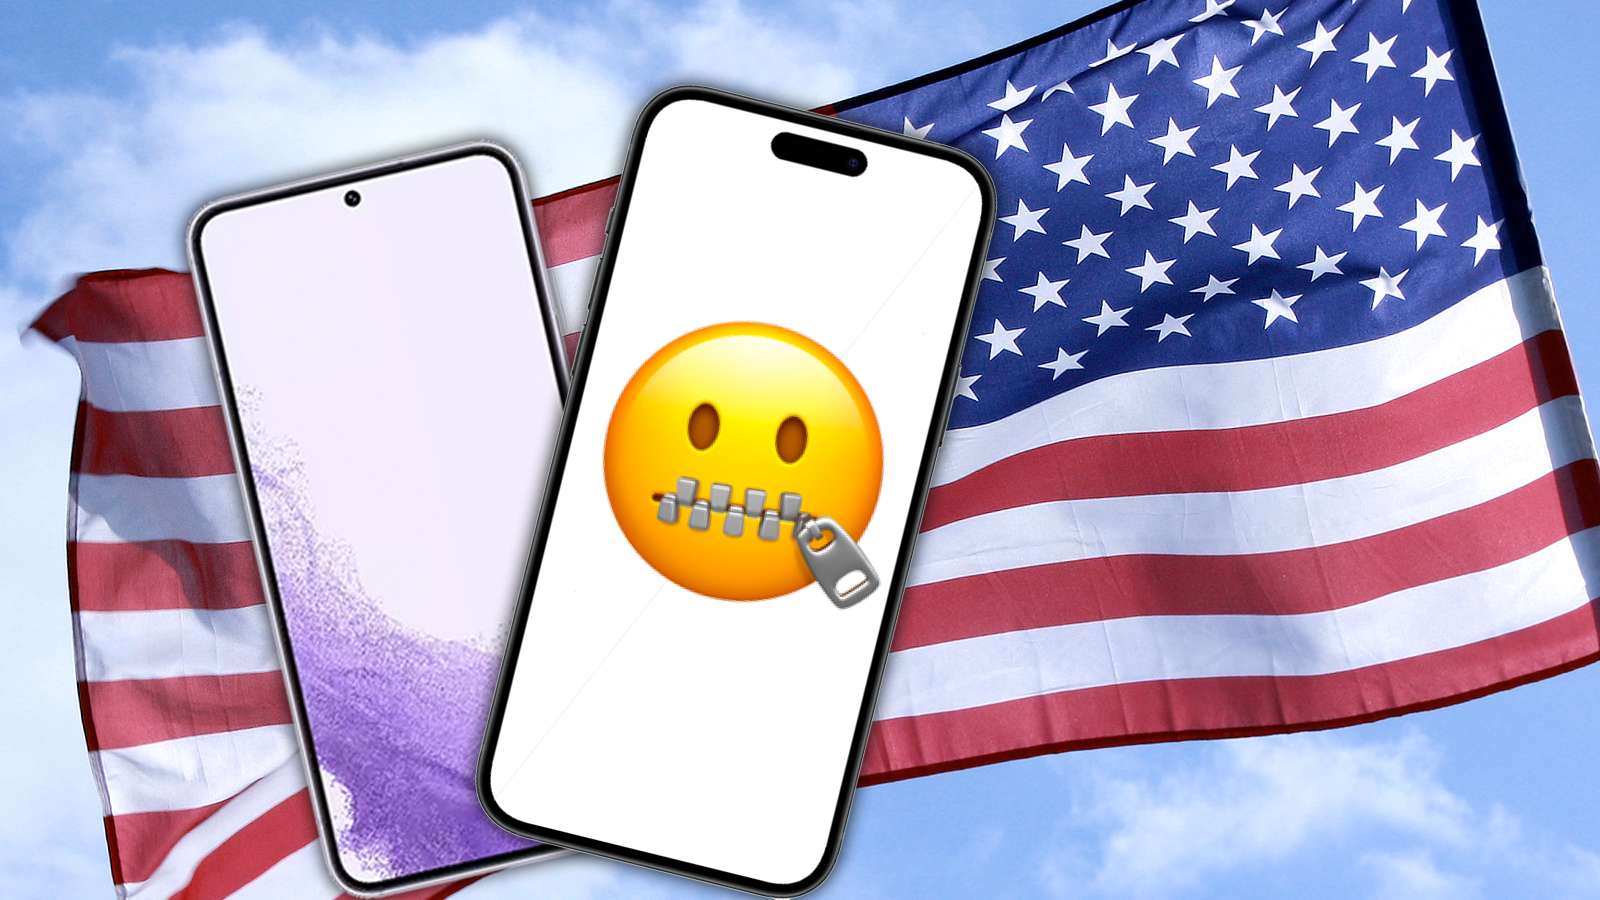 us flag with iphone & samsung phone overlayed with zipped lipped emoji